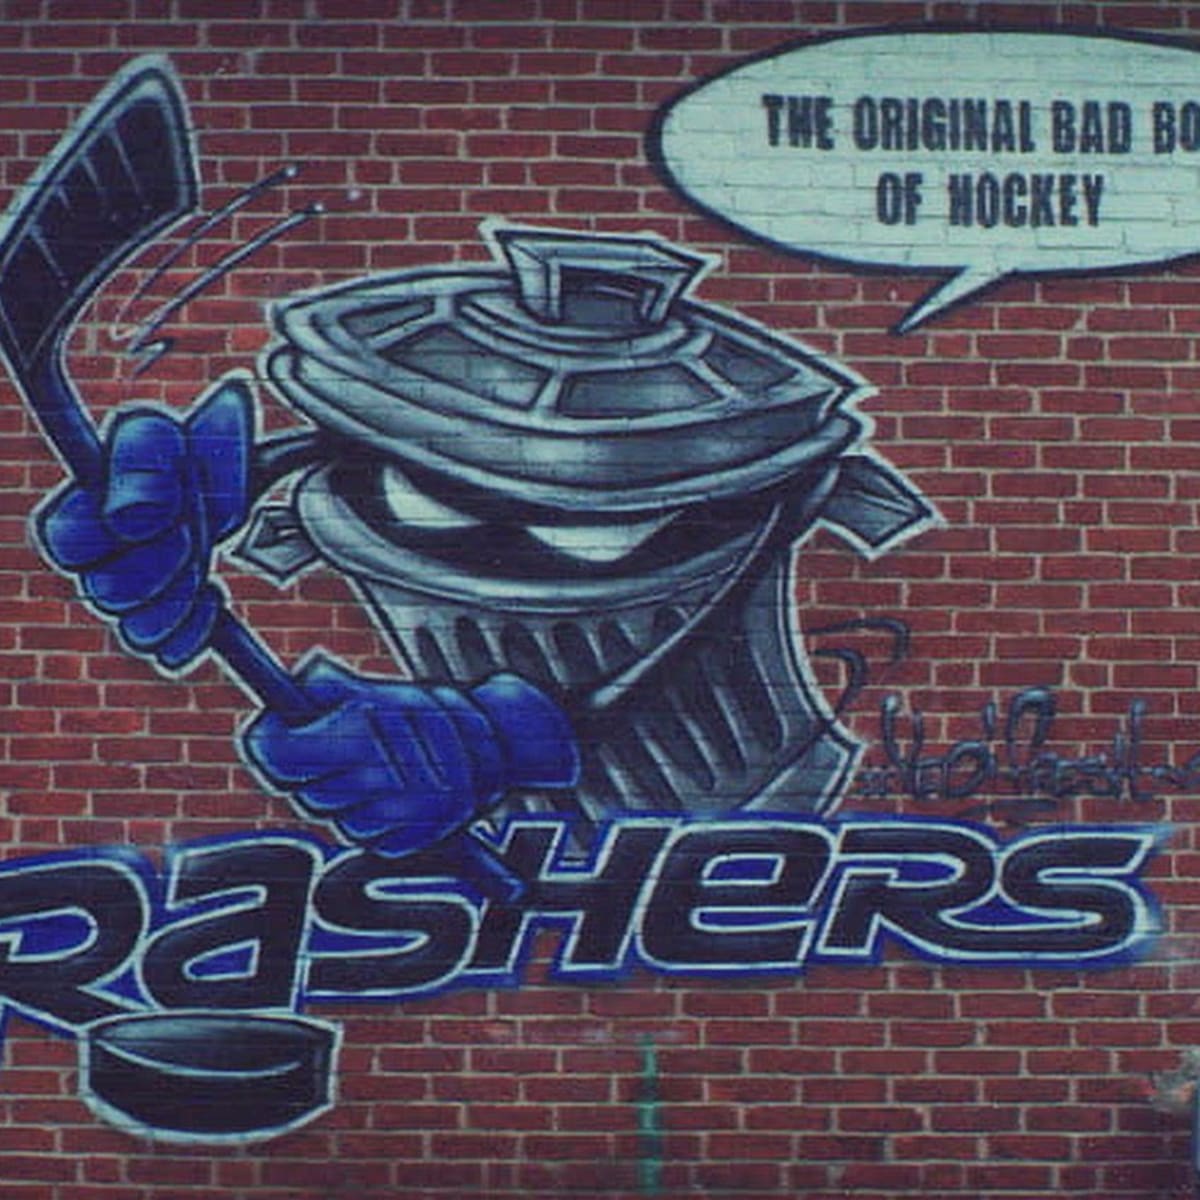 Hollywood is making a movie about the Danbury Trashers